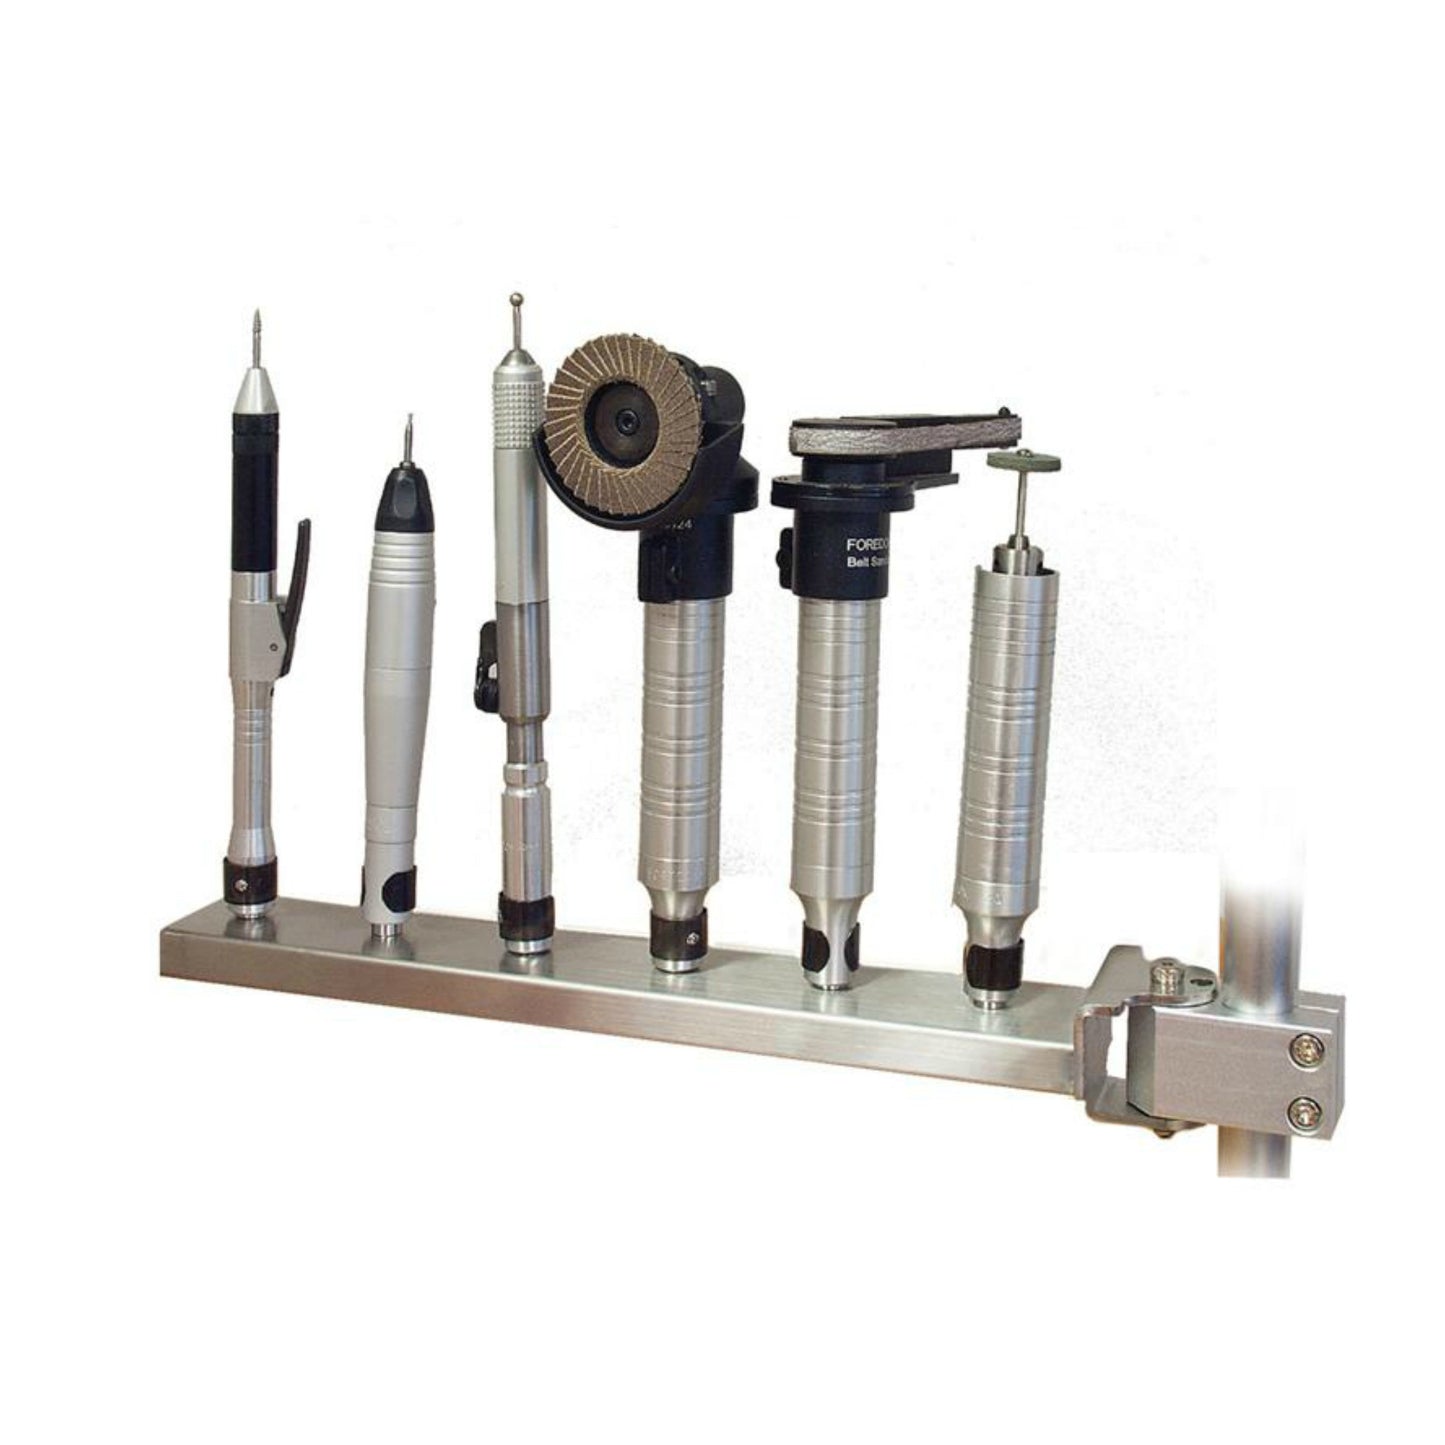 Foredom® Component Arm -  Multi Handpiece Arm